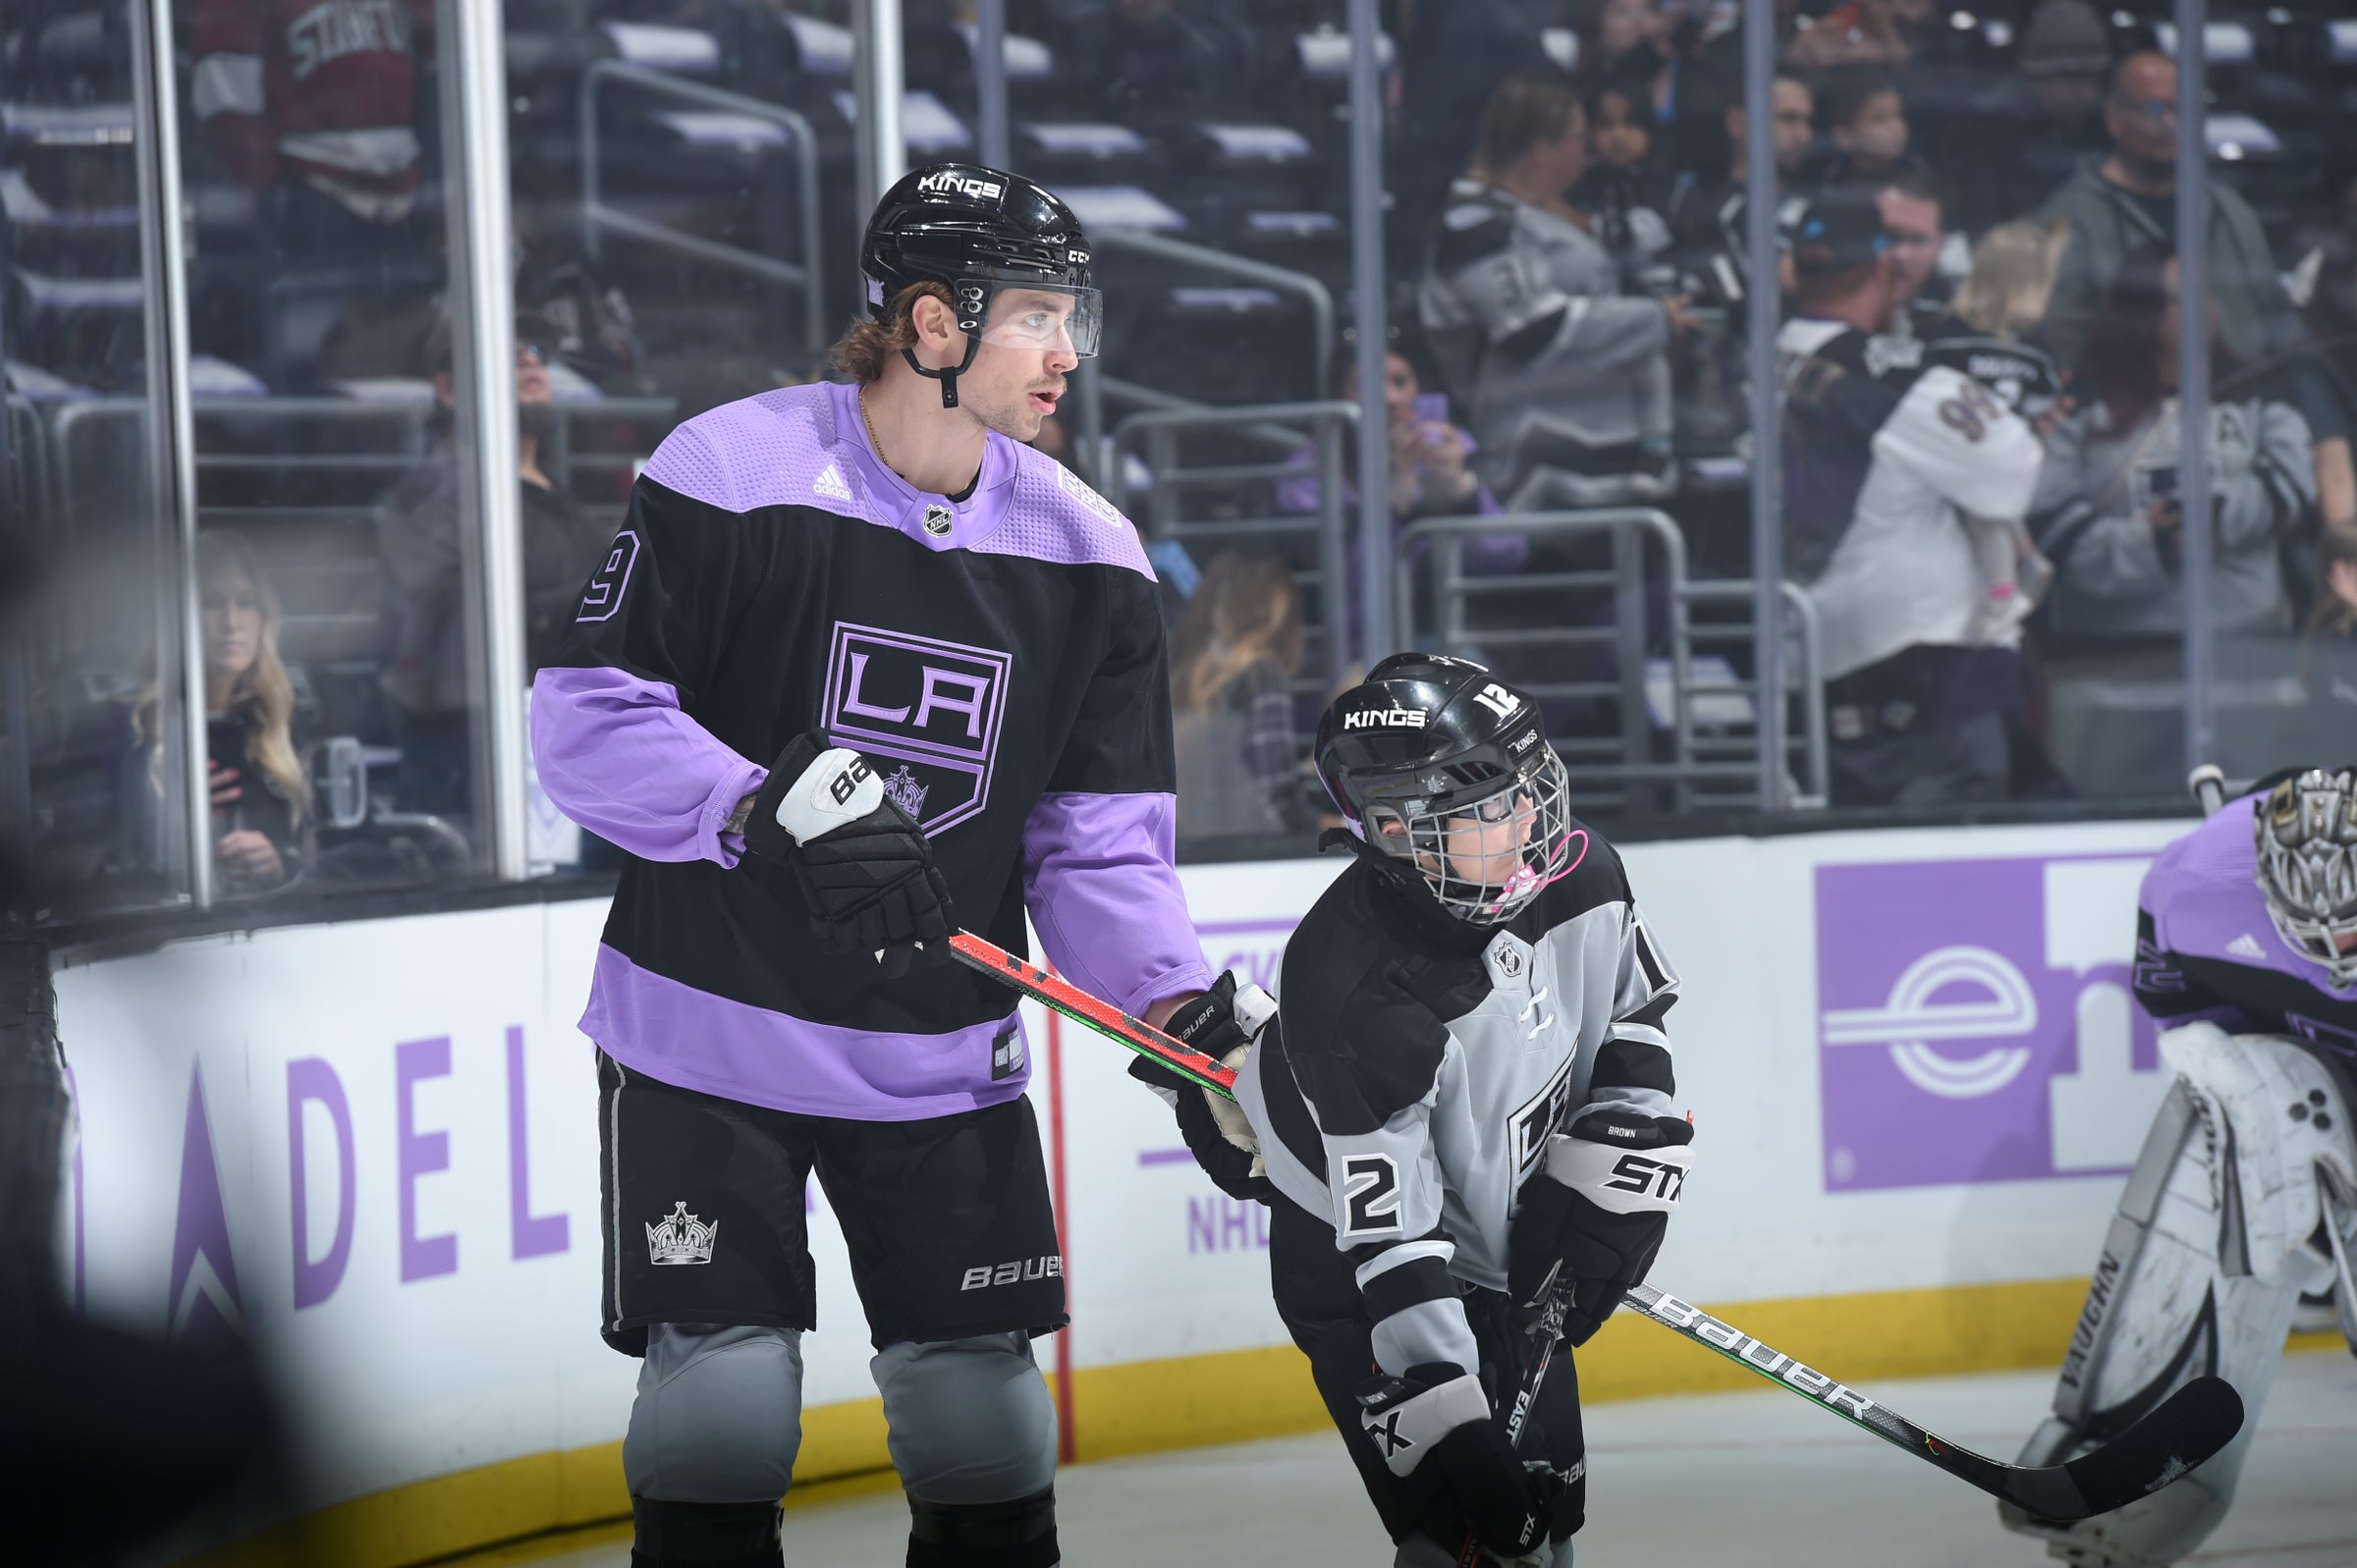 LA Kings charity auctioning off special edition LA Dodgers hockey